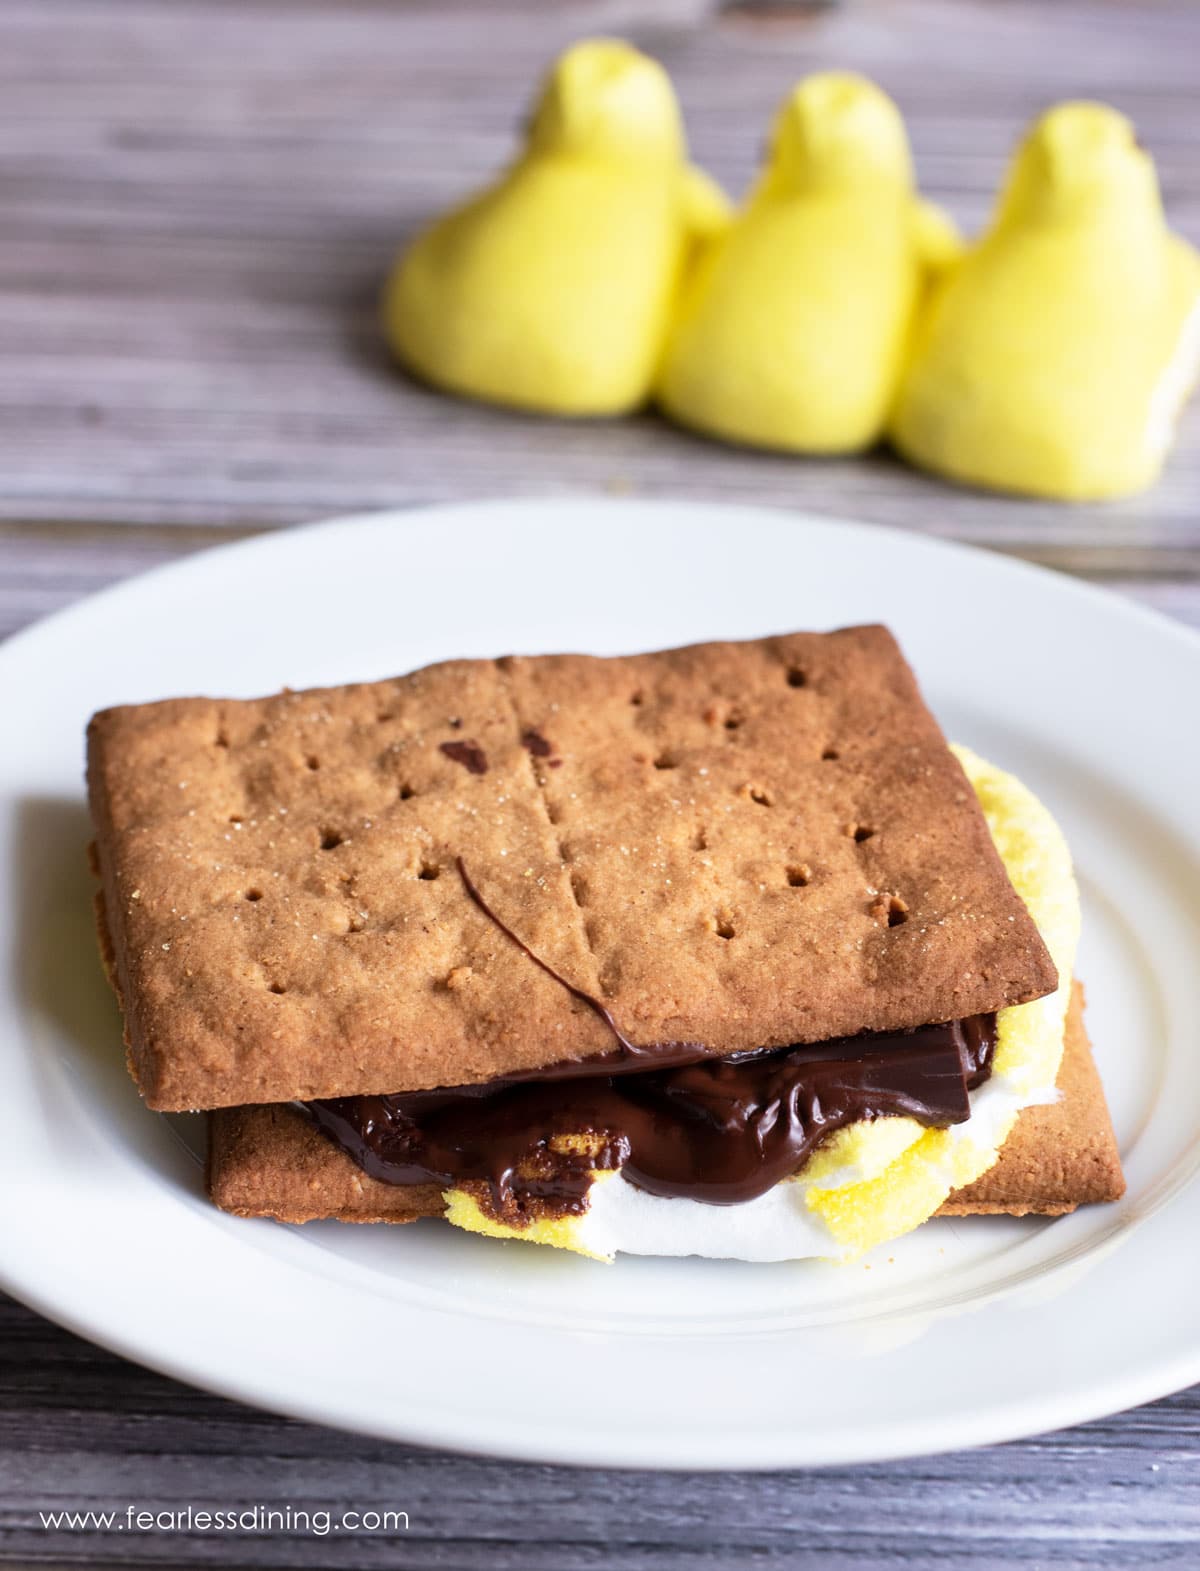 A s'mores made with a yellow Easter peep.